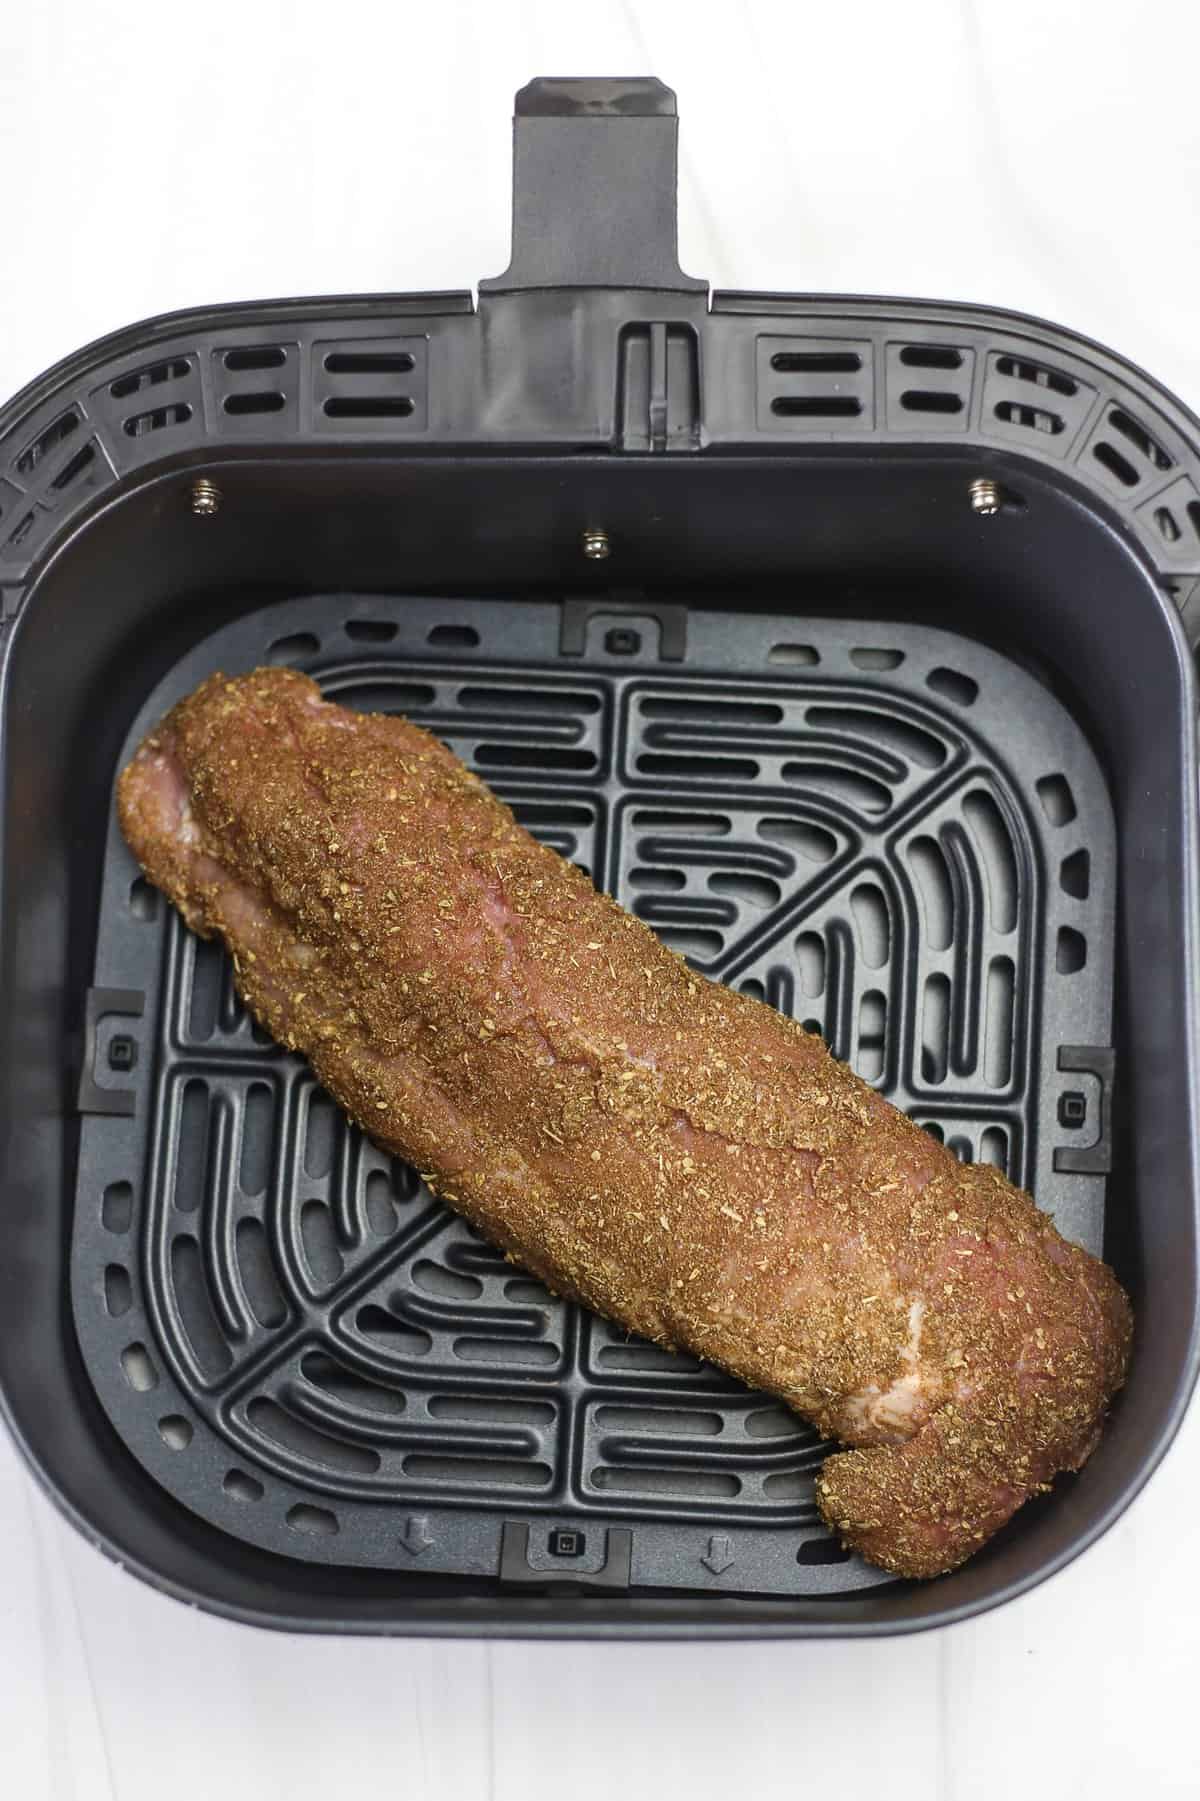 Pork tenderloin with seasoning rub in an air fryer basket ready to be cooked.